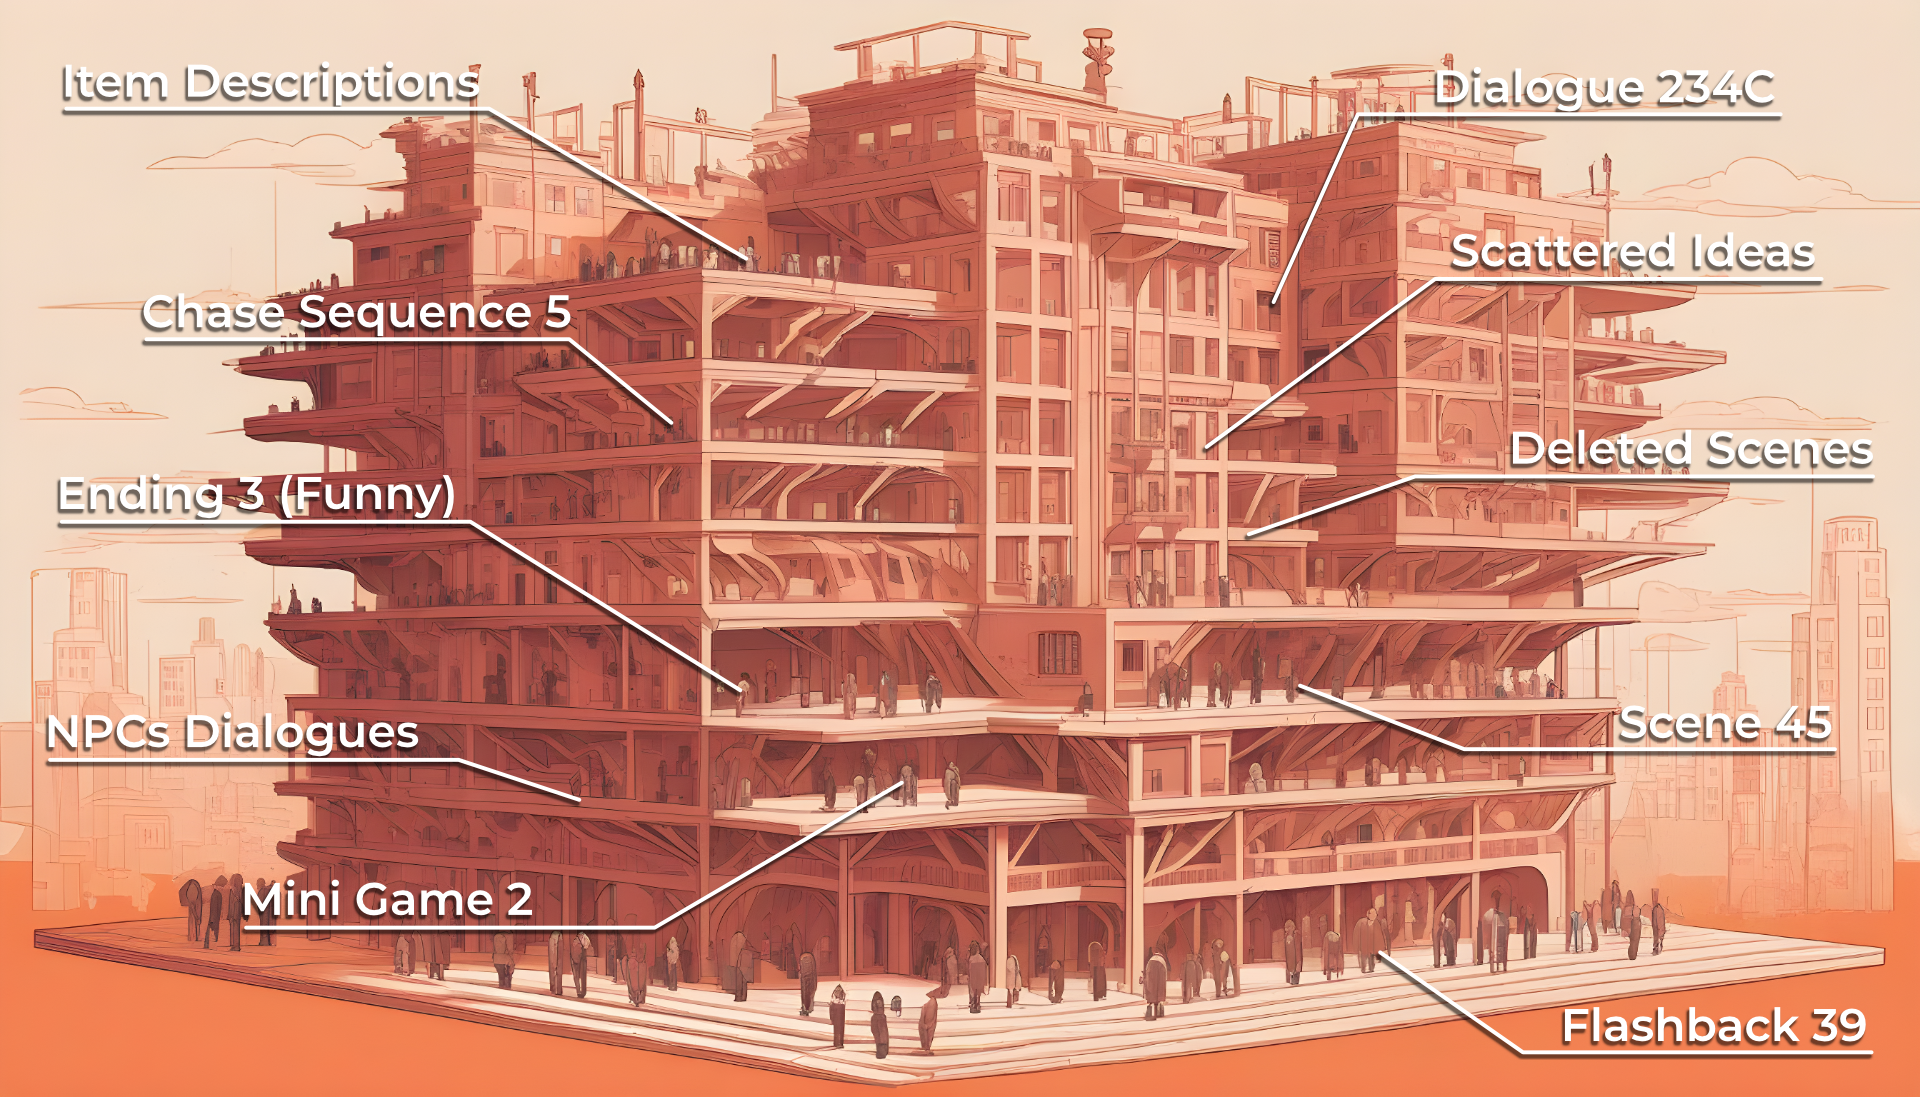 Illustration of a multi-storey building with each floor marked with labels like 